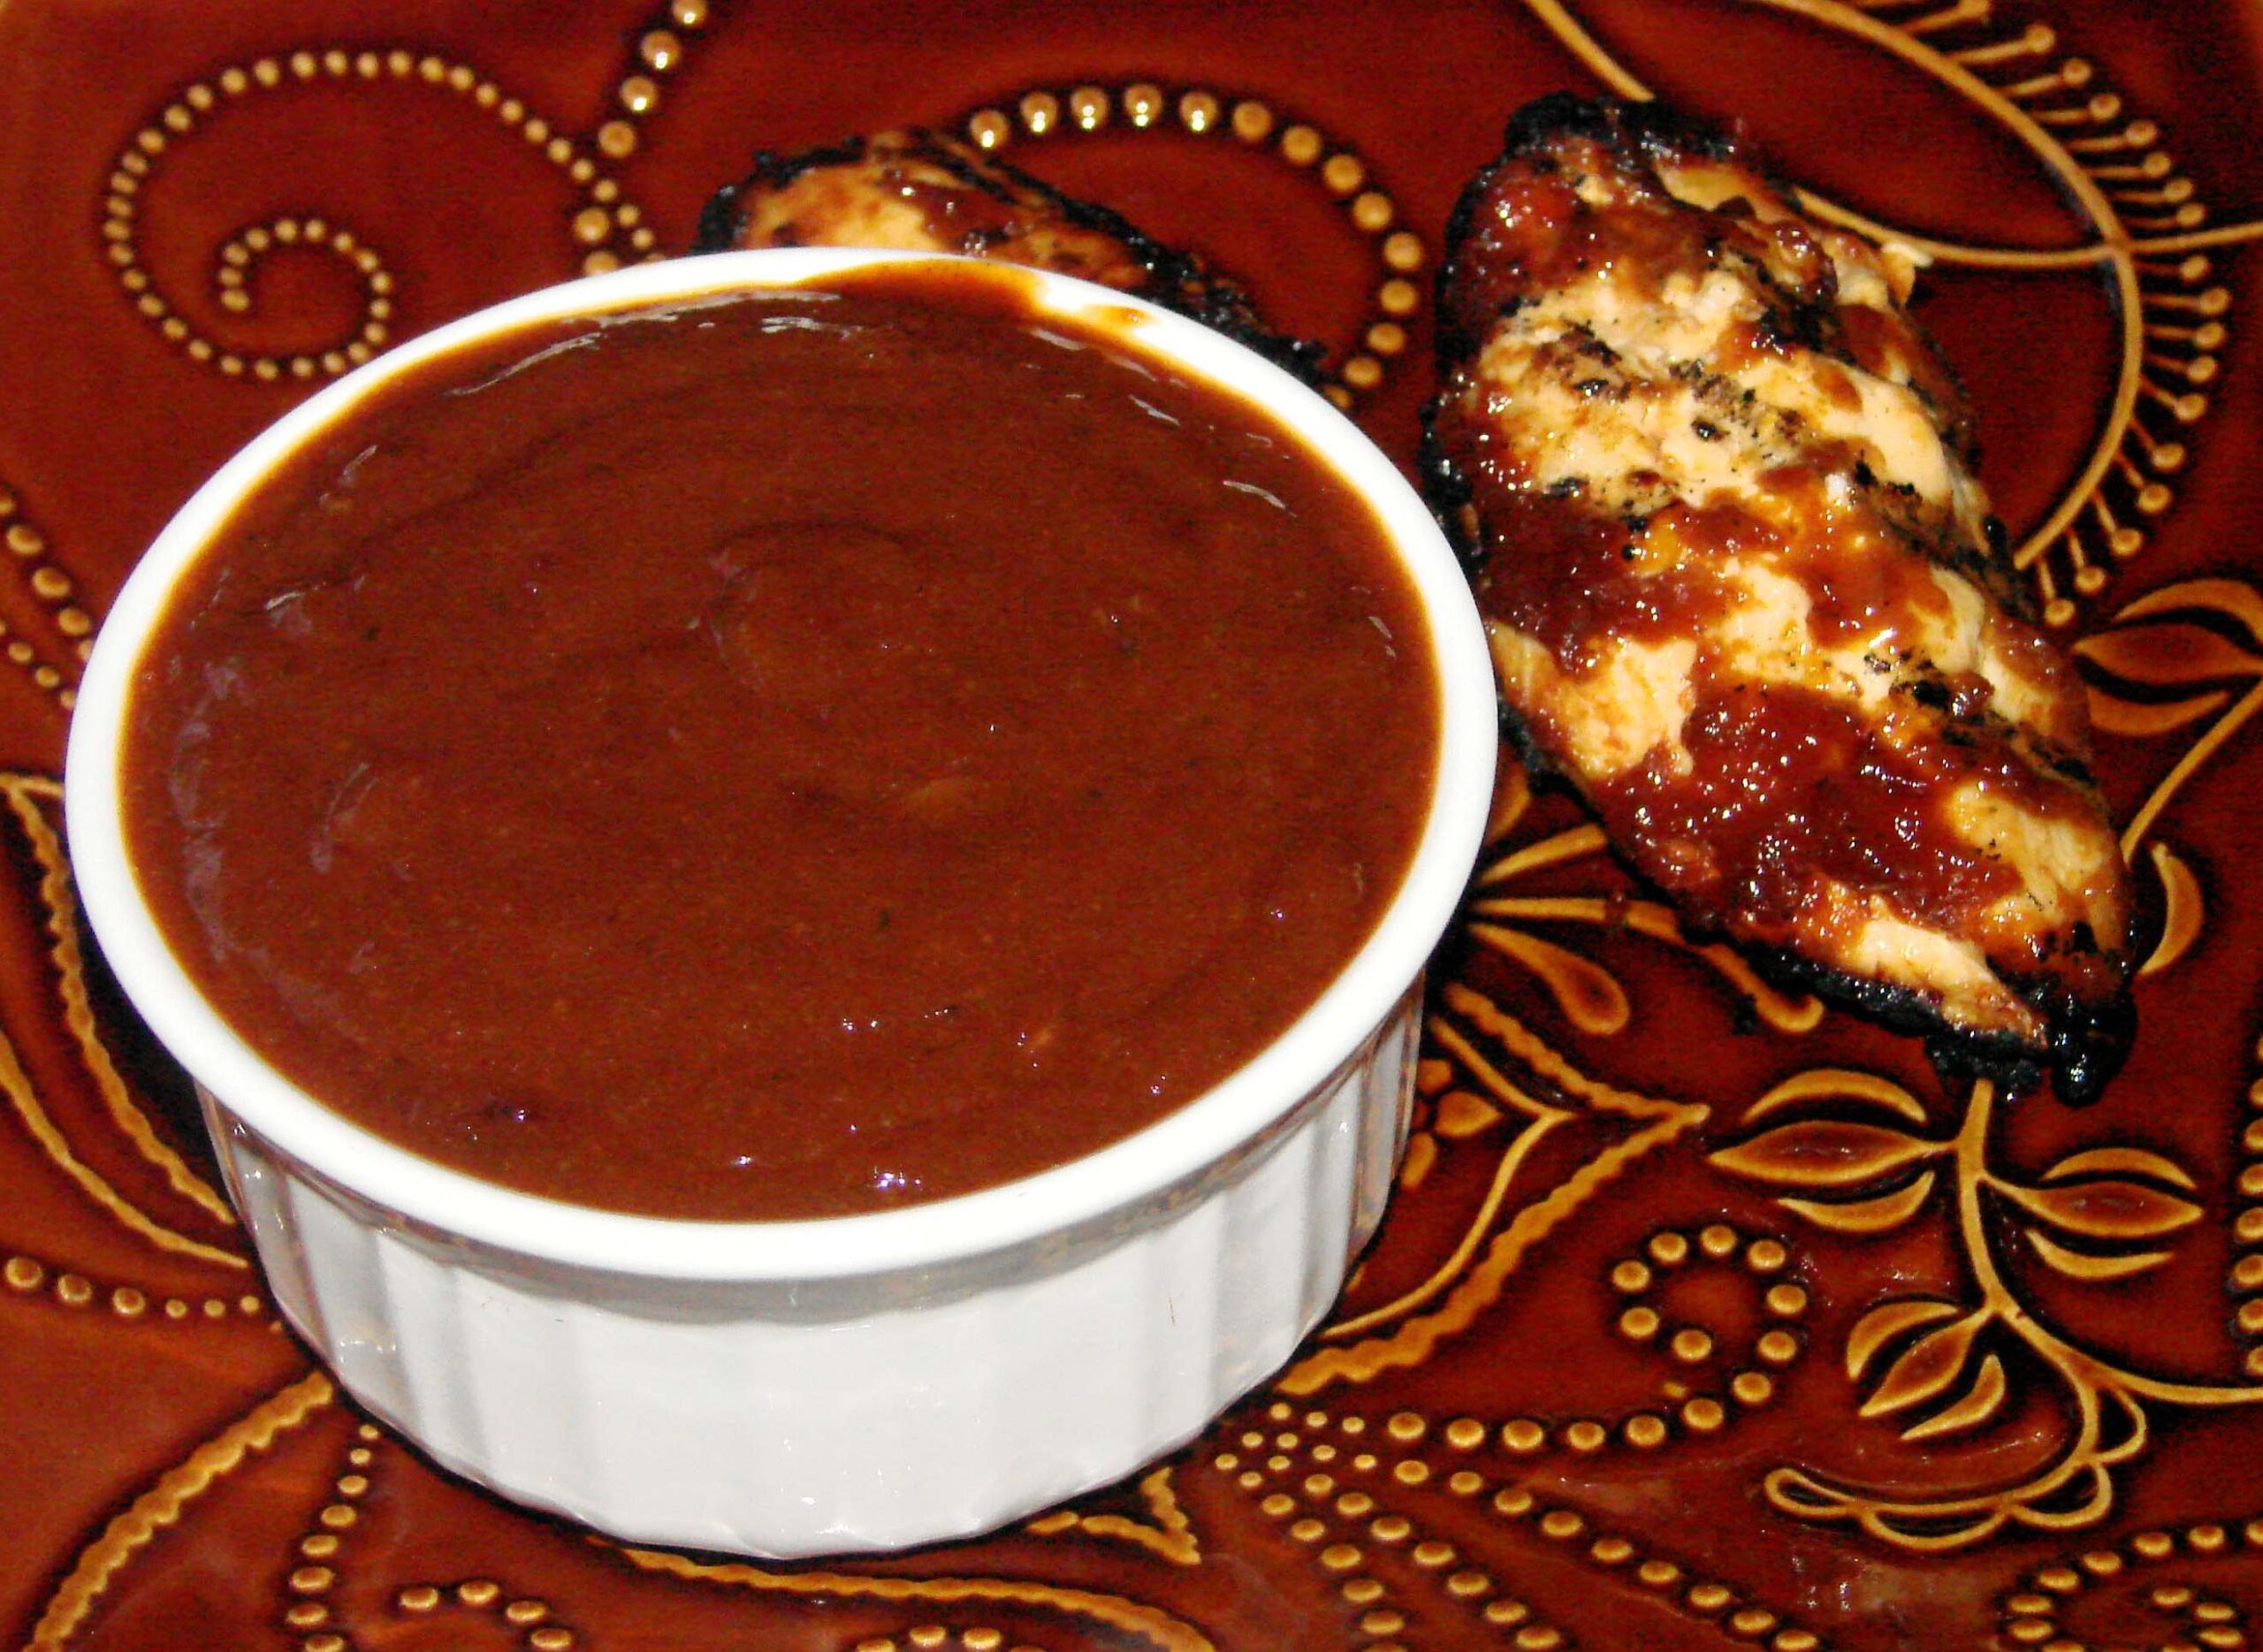  Drizzle this scrumptious black coffee barbecue sauce over your ribs for a flavor boost that'll knock your socks off!